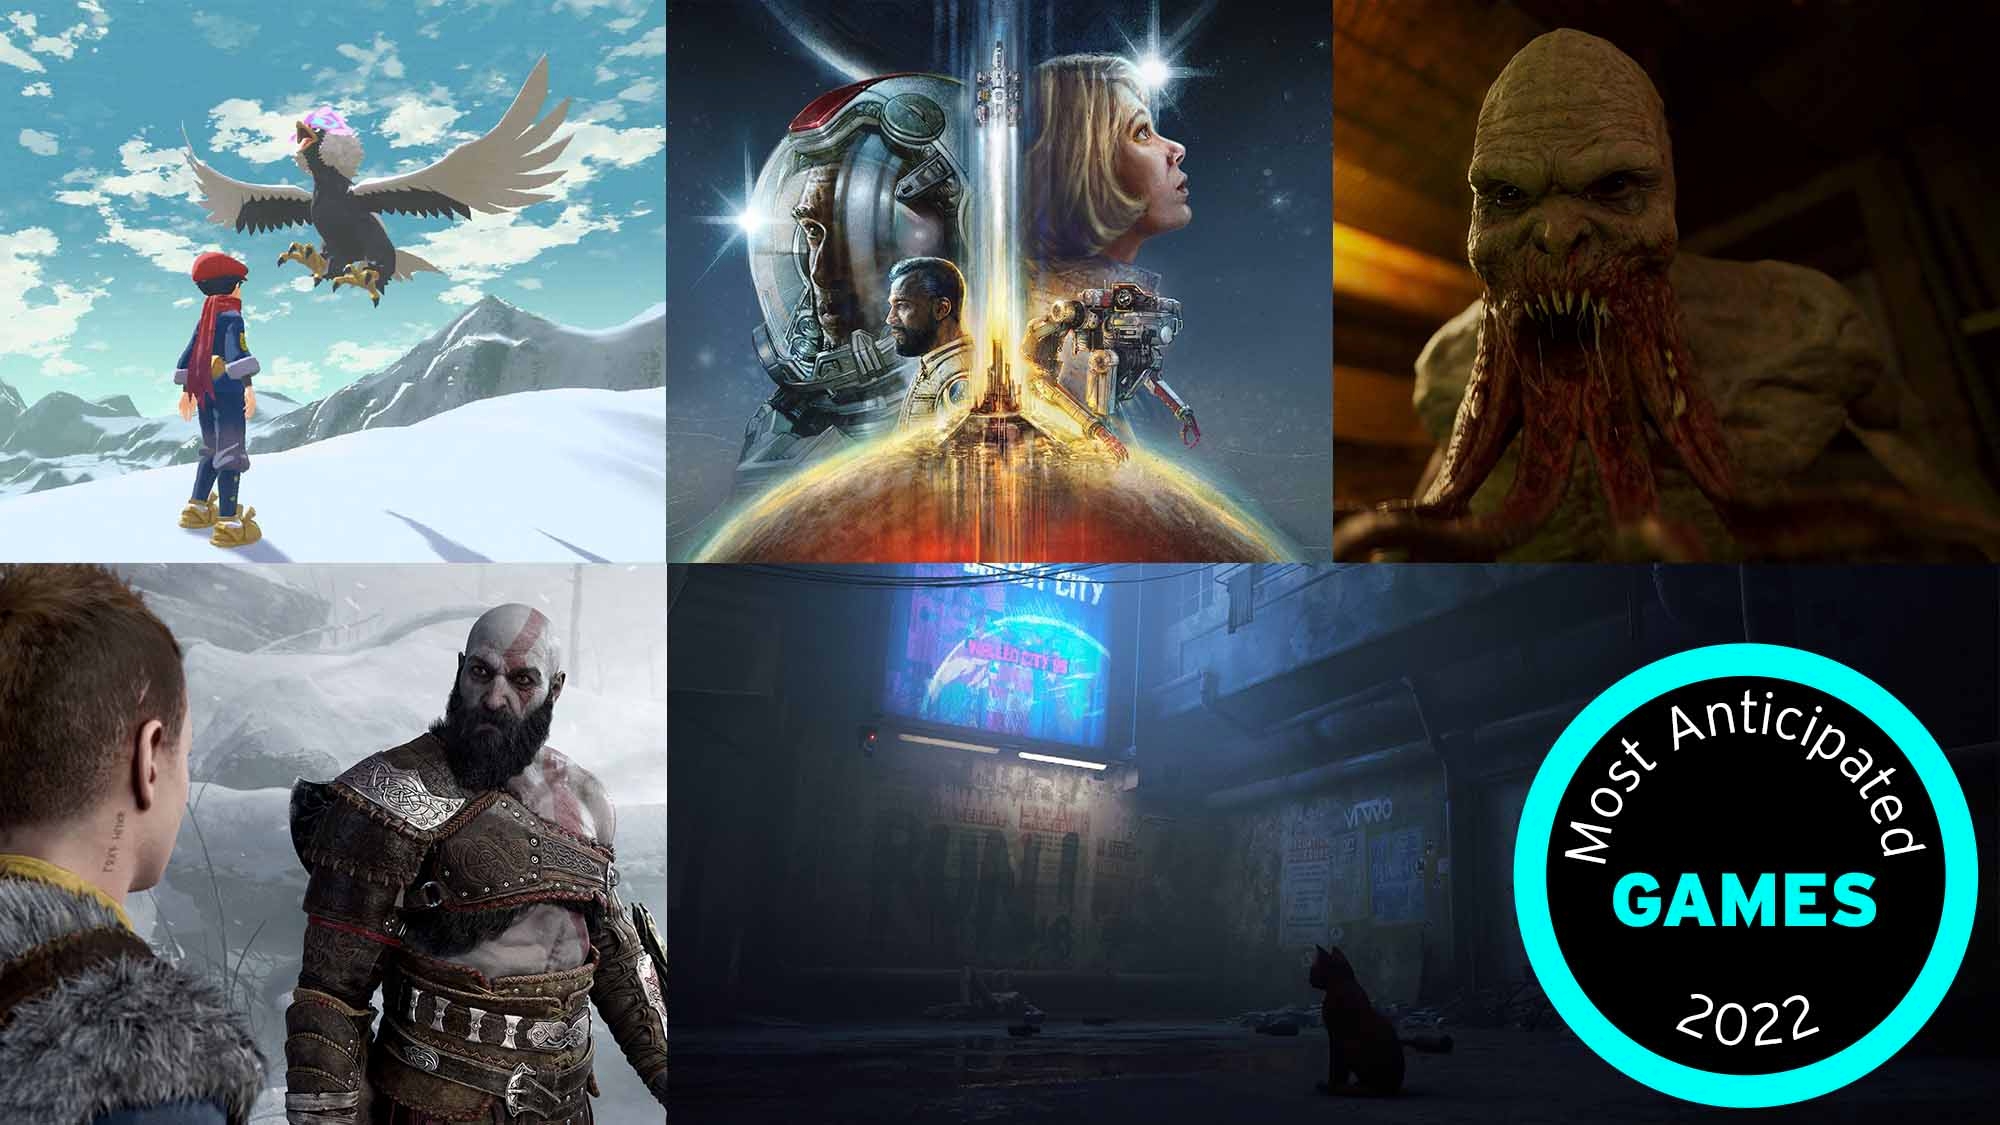 The 11 most anticipated video games of 2022